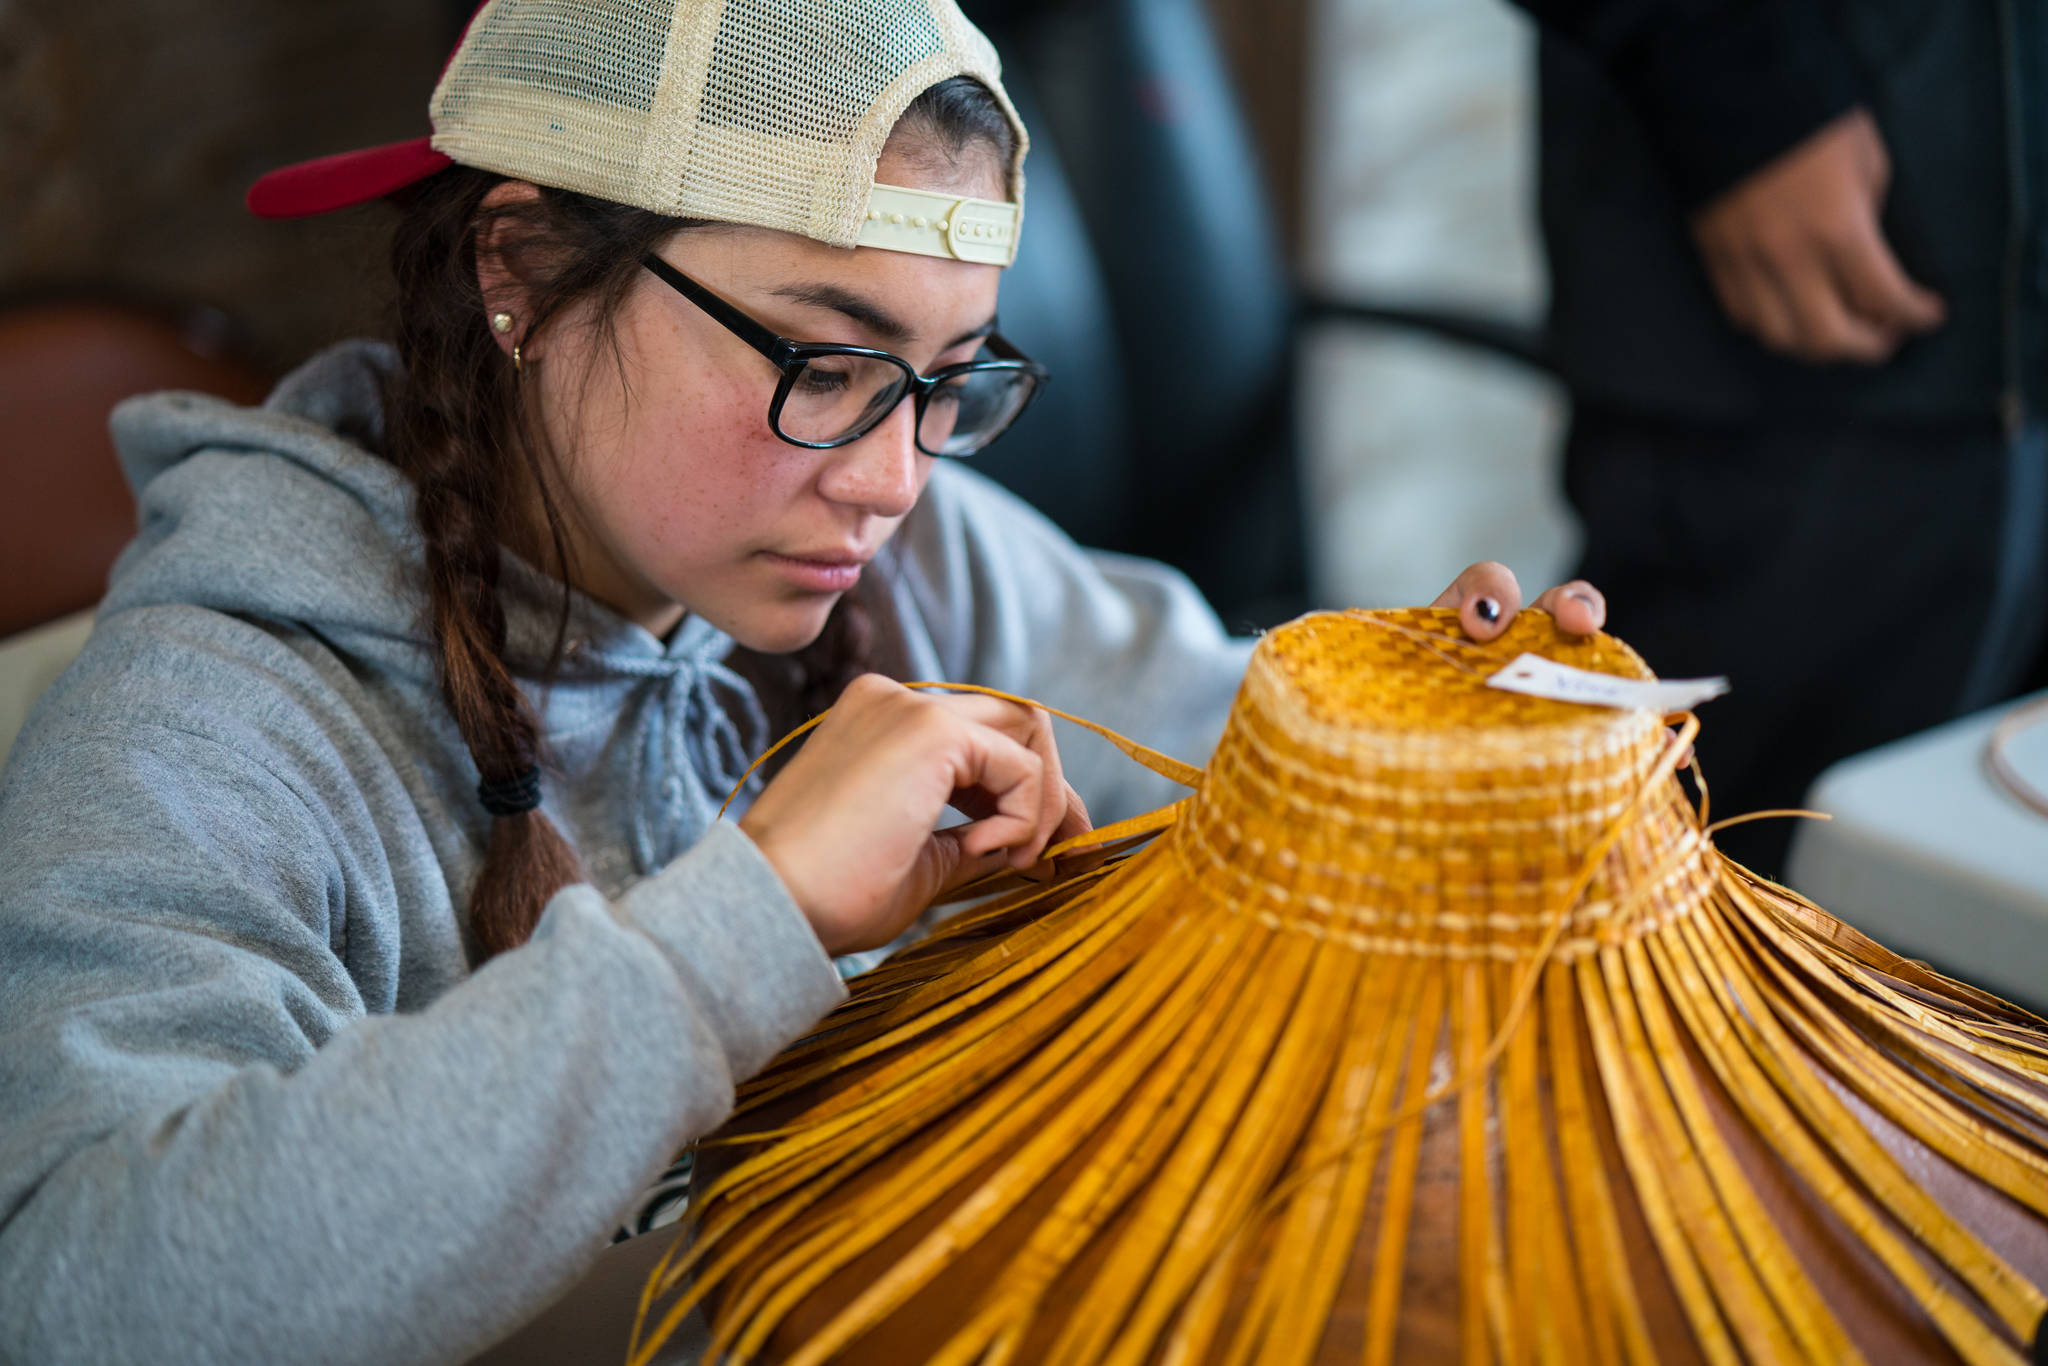 Participants learn new skills and weaving and leave with their own cedar hat. (Photo by Bethany Goodrich)